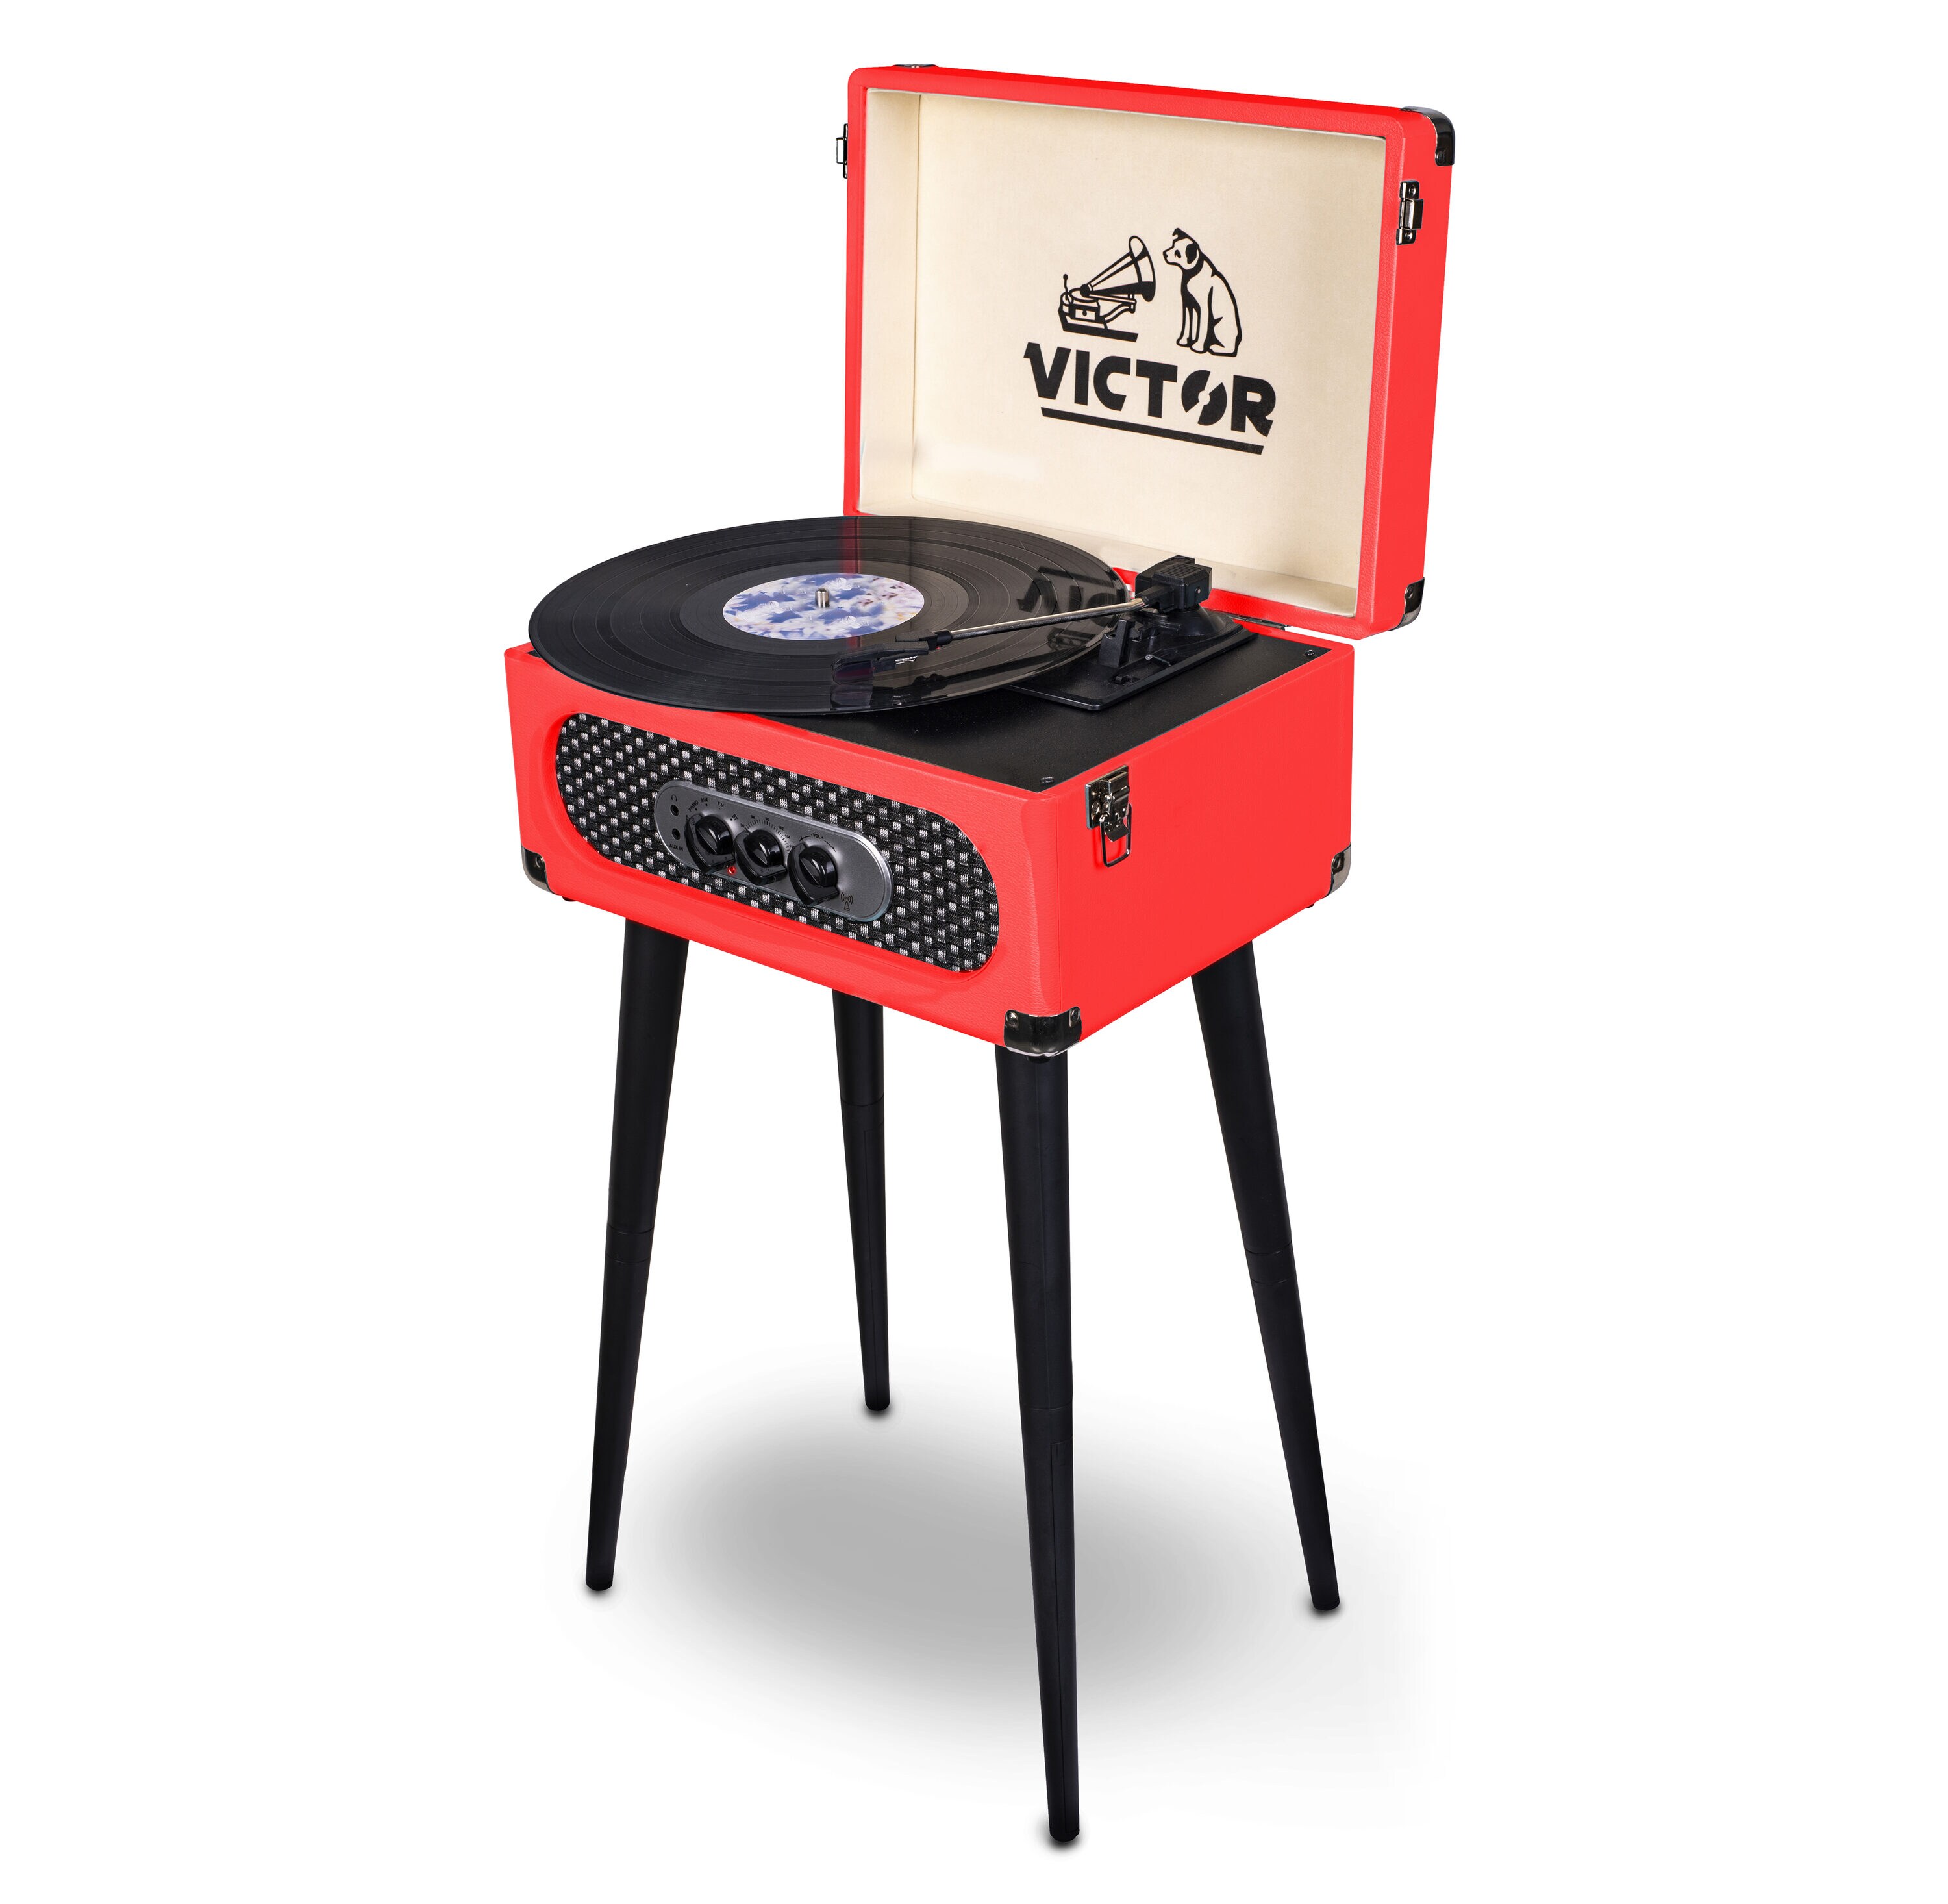 Red Bluetooth 3-Speed Turntable with Built-In Speakers and USB Connectivity | - Victor VWRP-3200-RD